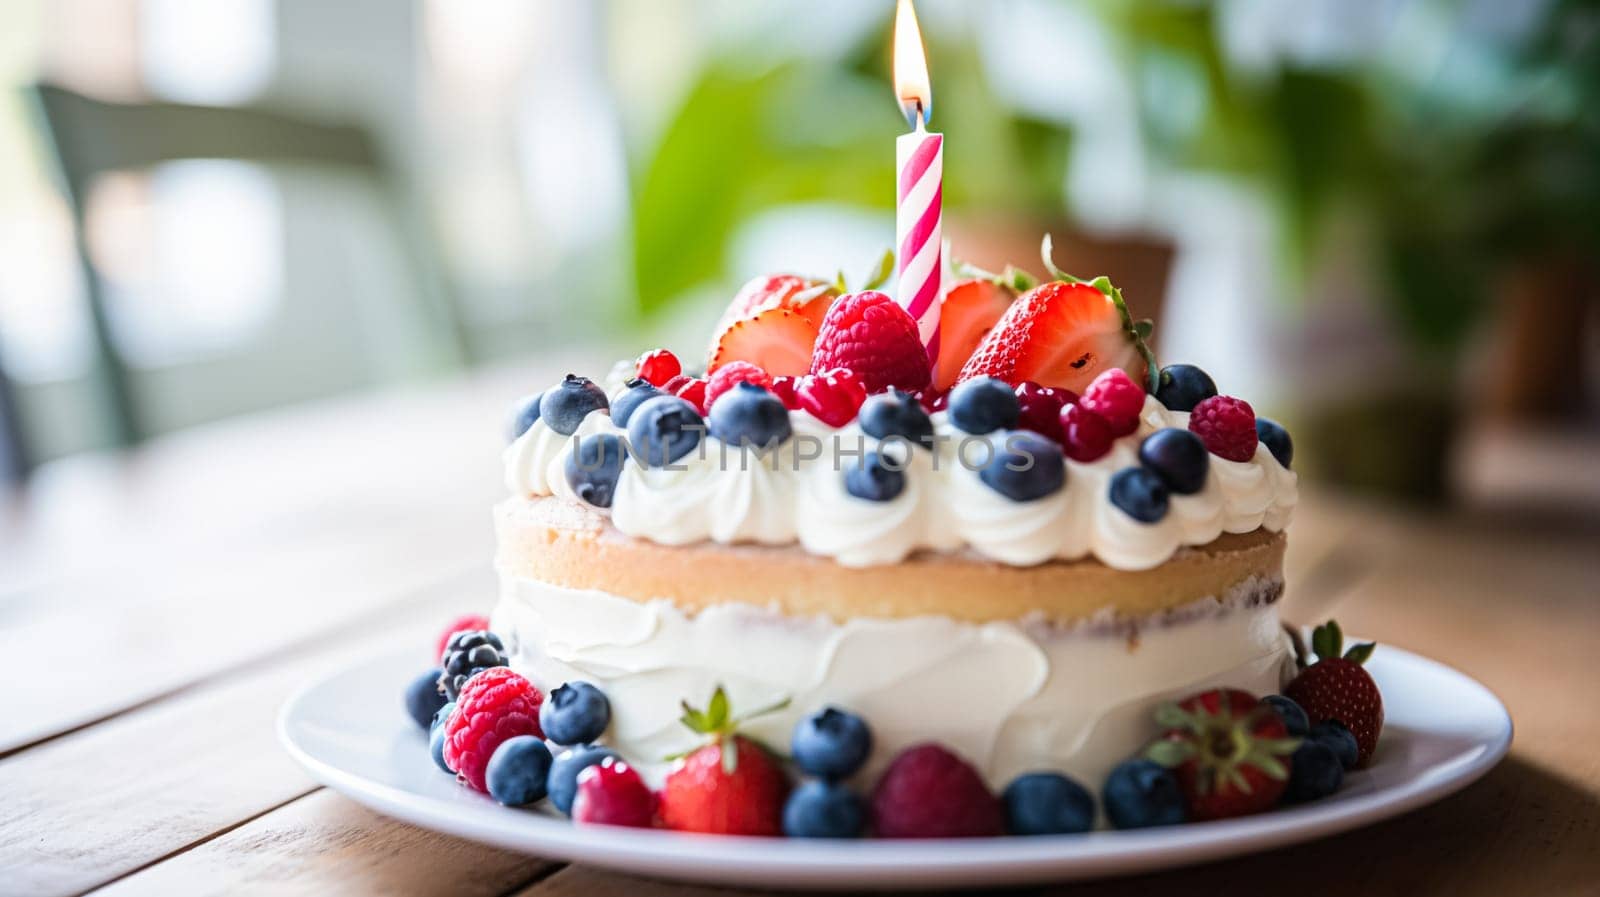 Homemade birthday cake in the English countryside house, cottage kitchen food and holiday baking recipe inspiration